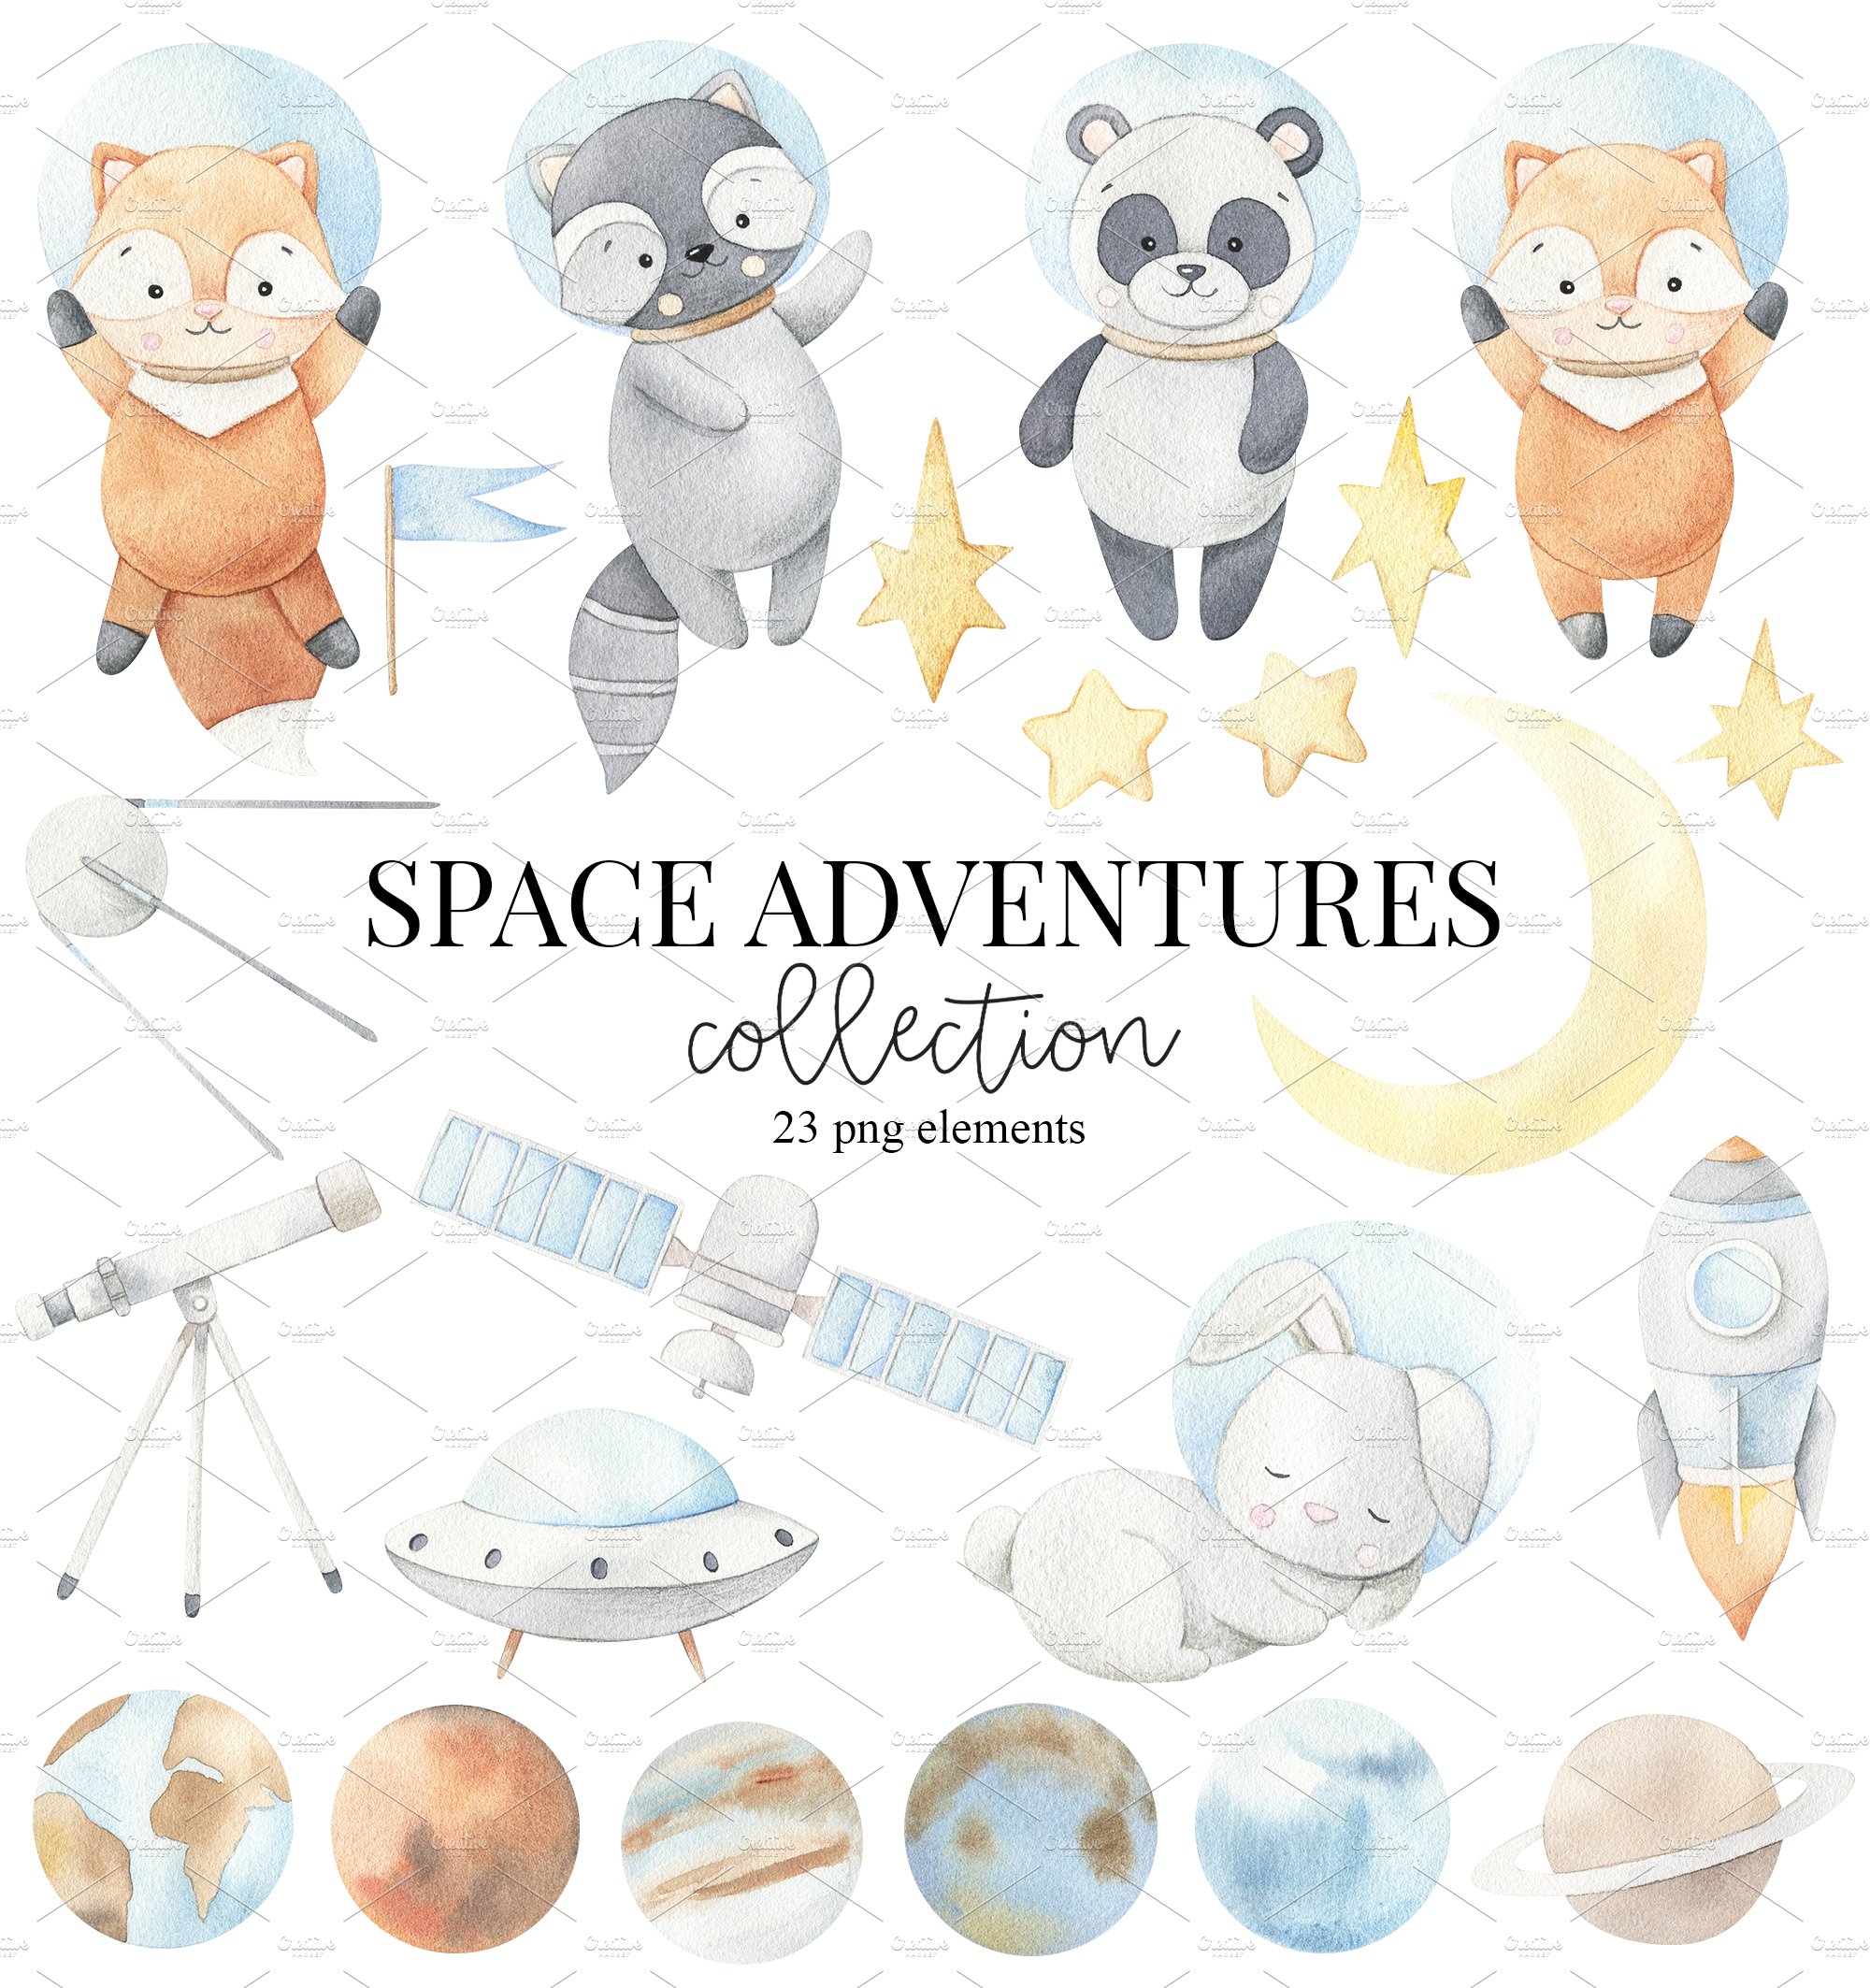 Space adventures - Watercolor set preview image.